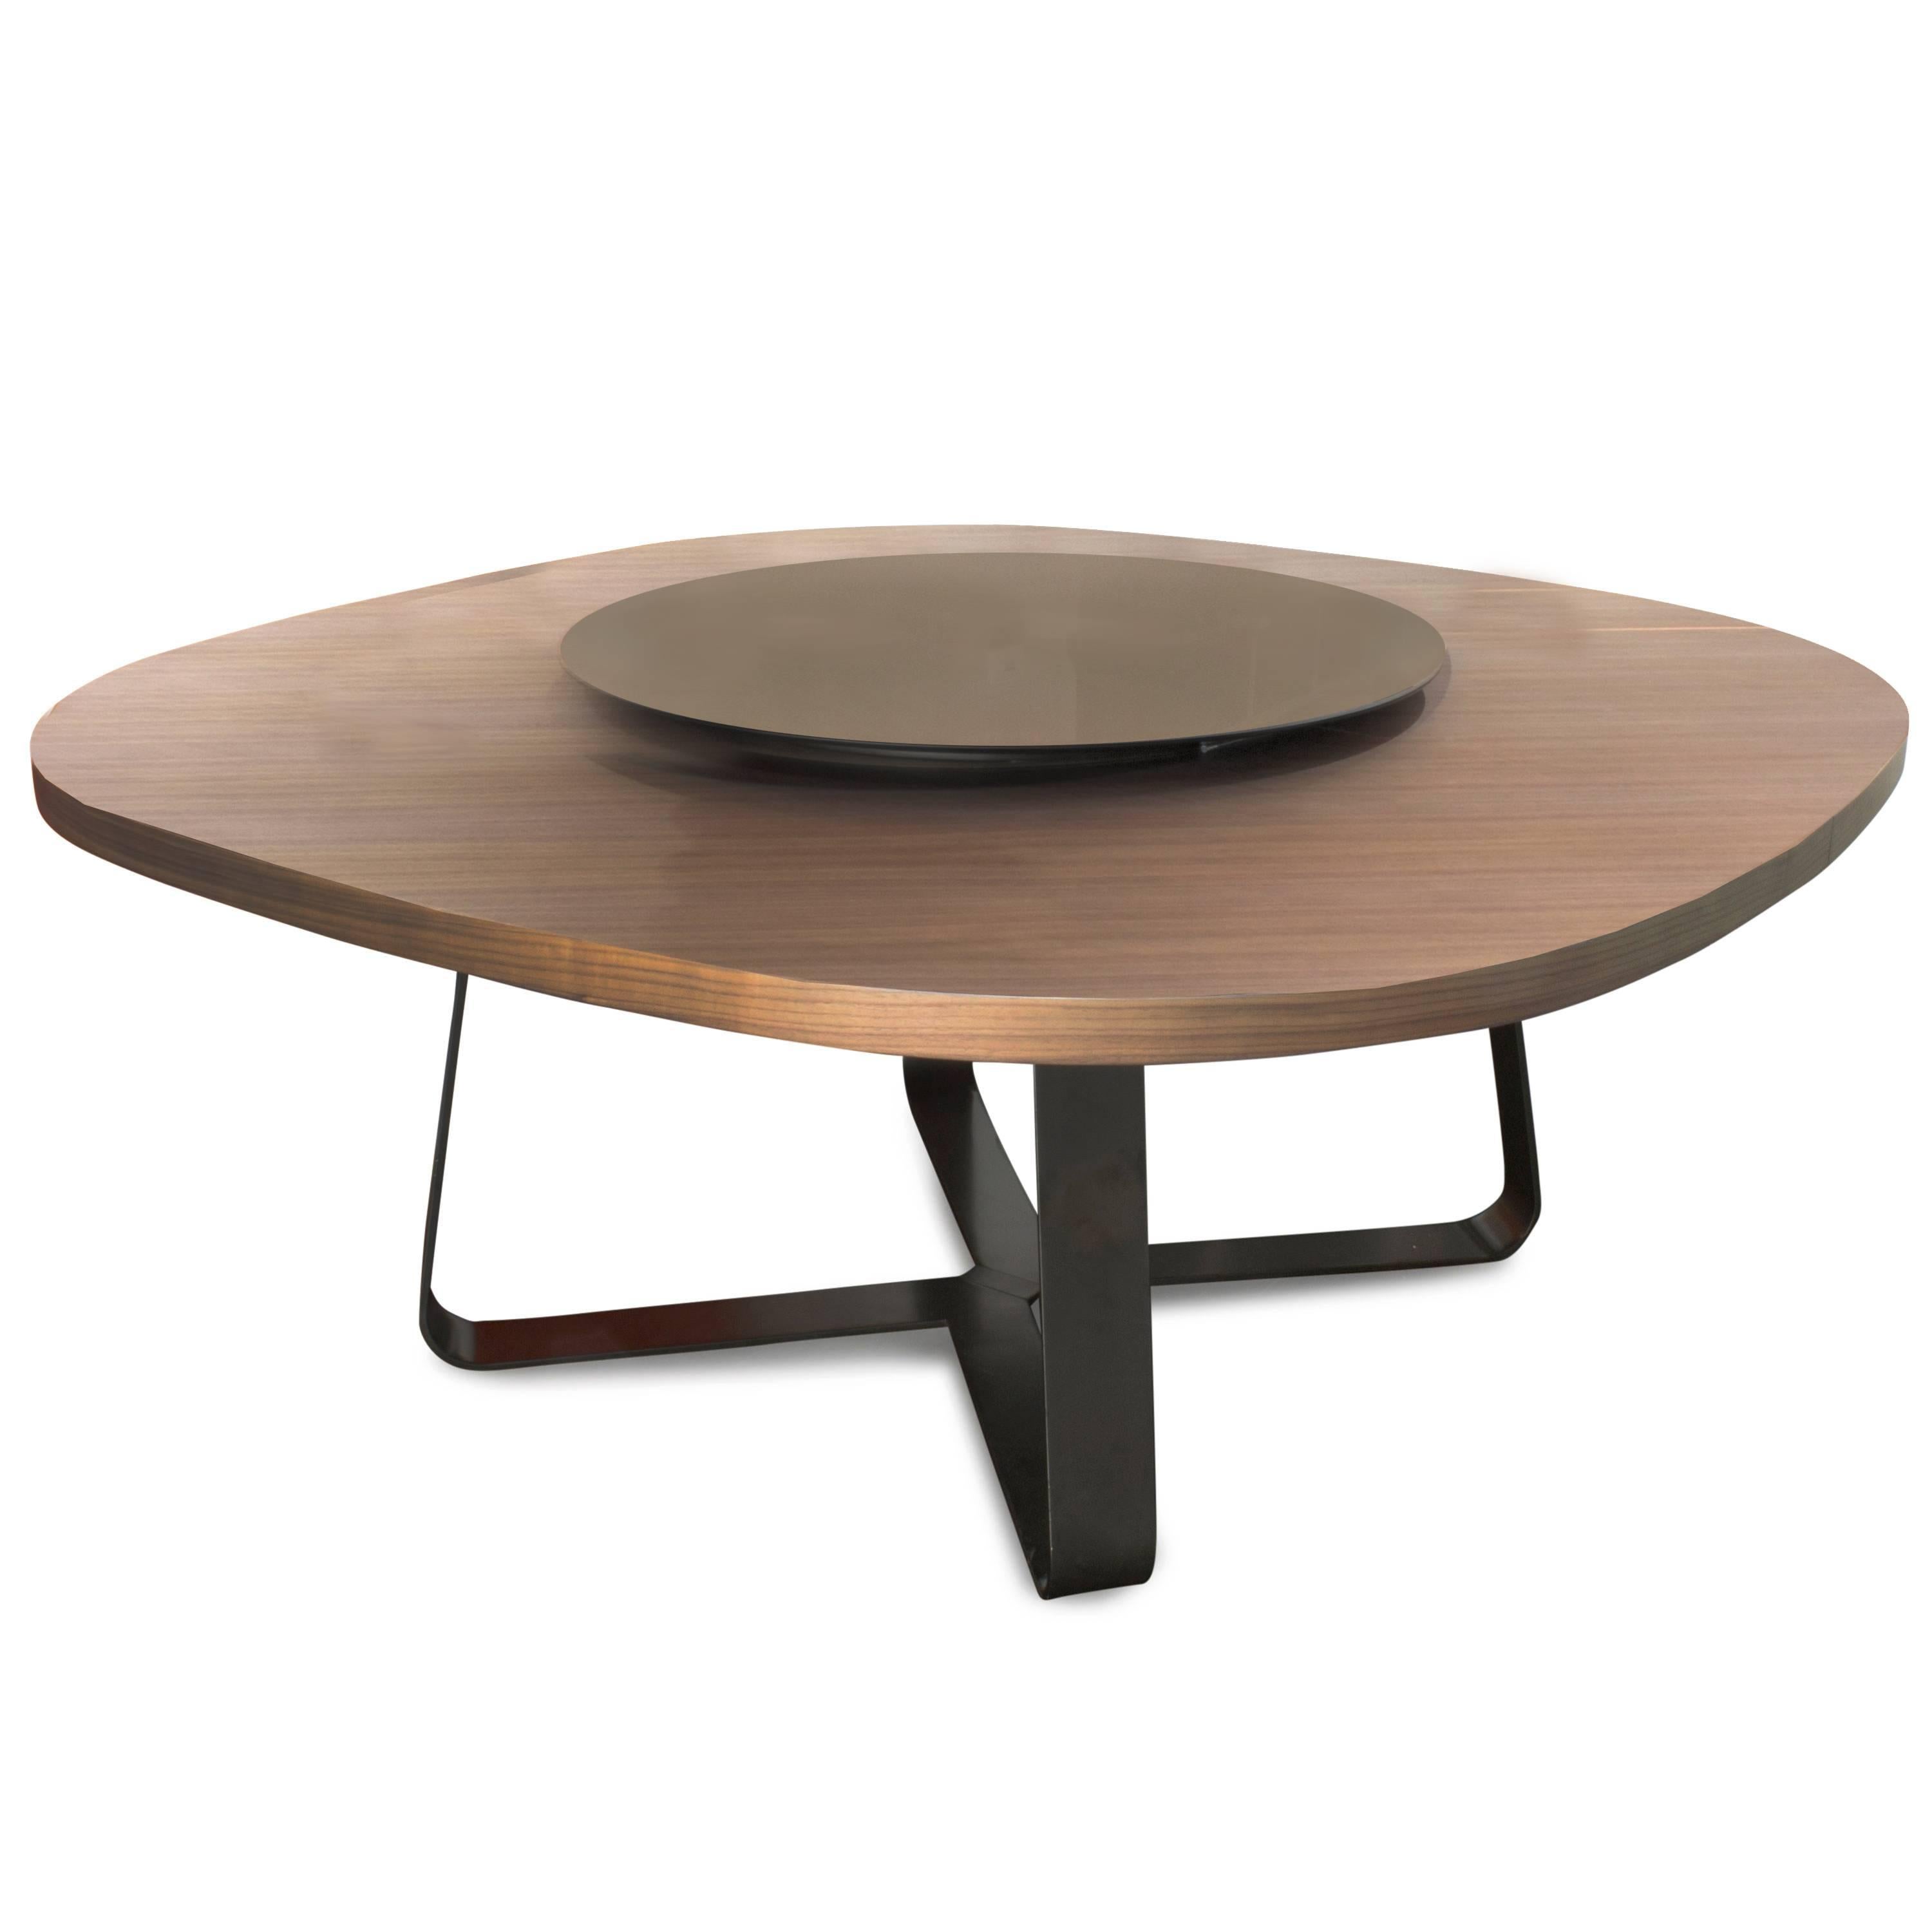 Italian Modern Lazy Susan Susy Dining Table by Sung-Sook Kim for Former, Italy For Sale